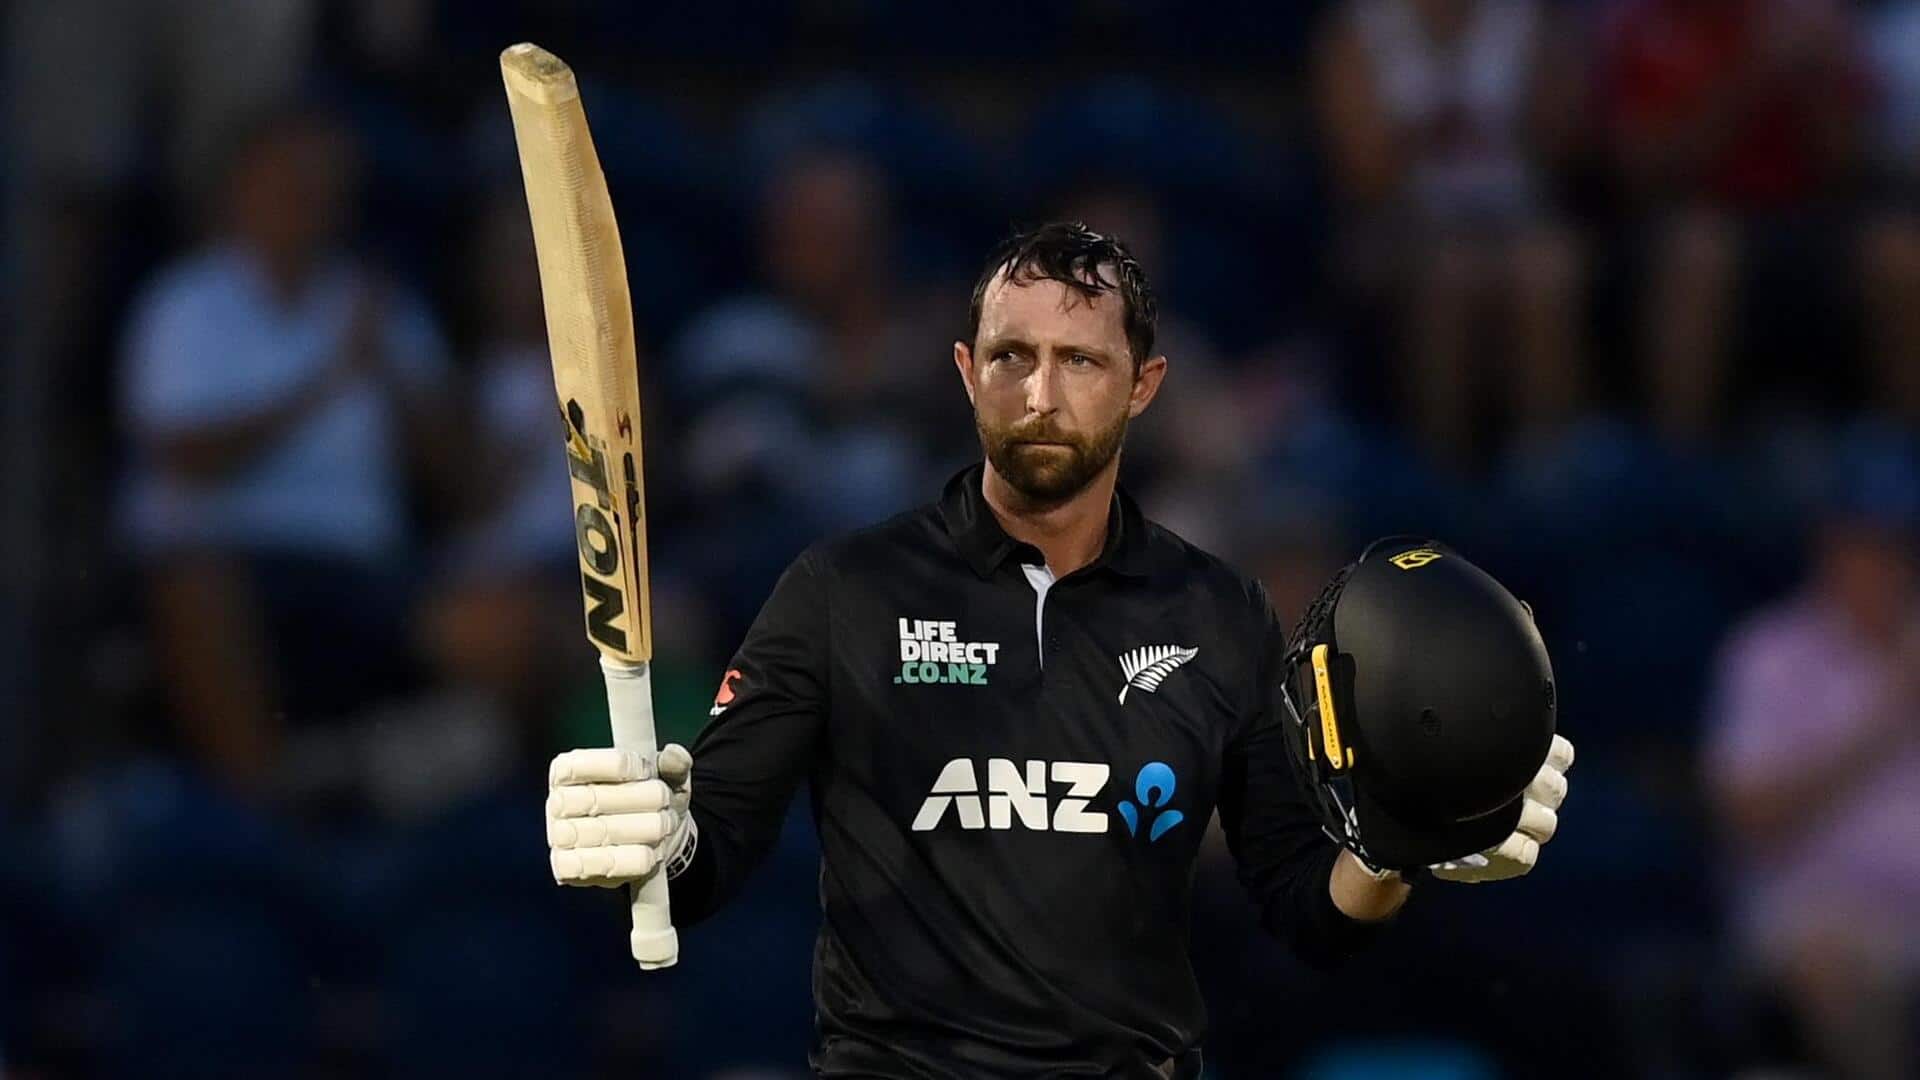 New Zealand hammer England in first ODI: Key stats